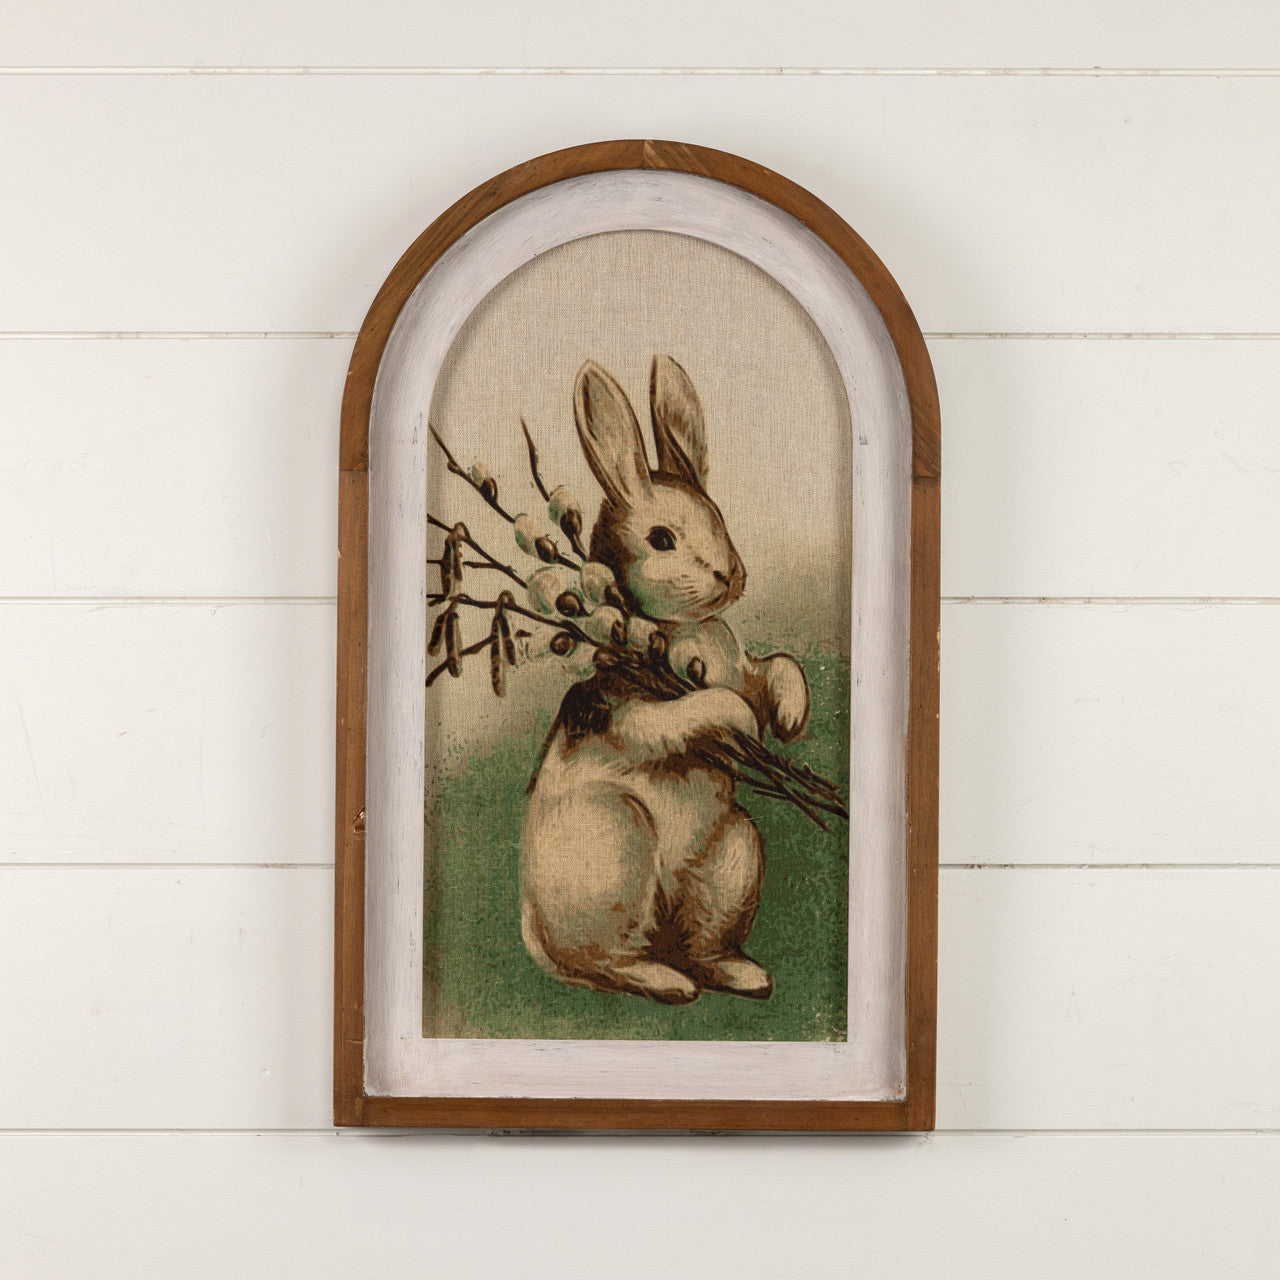 The Framed Bunny Arched Print